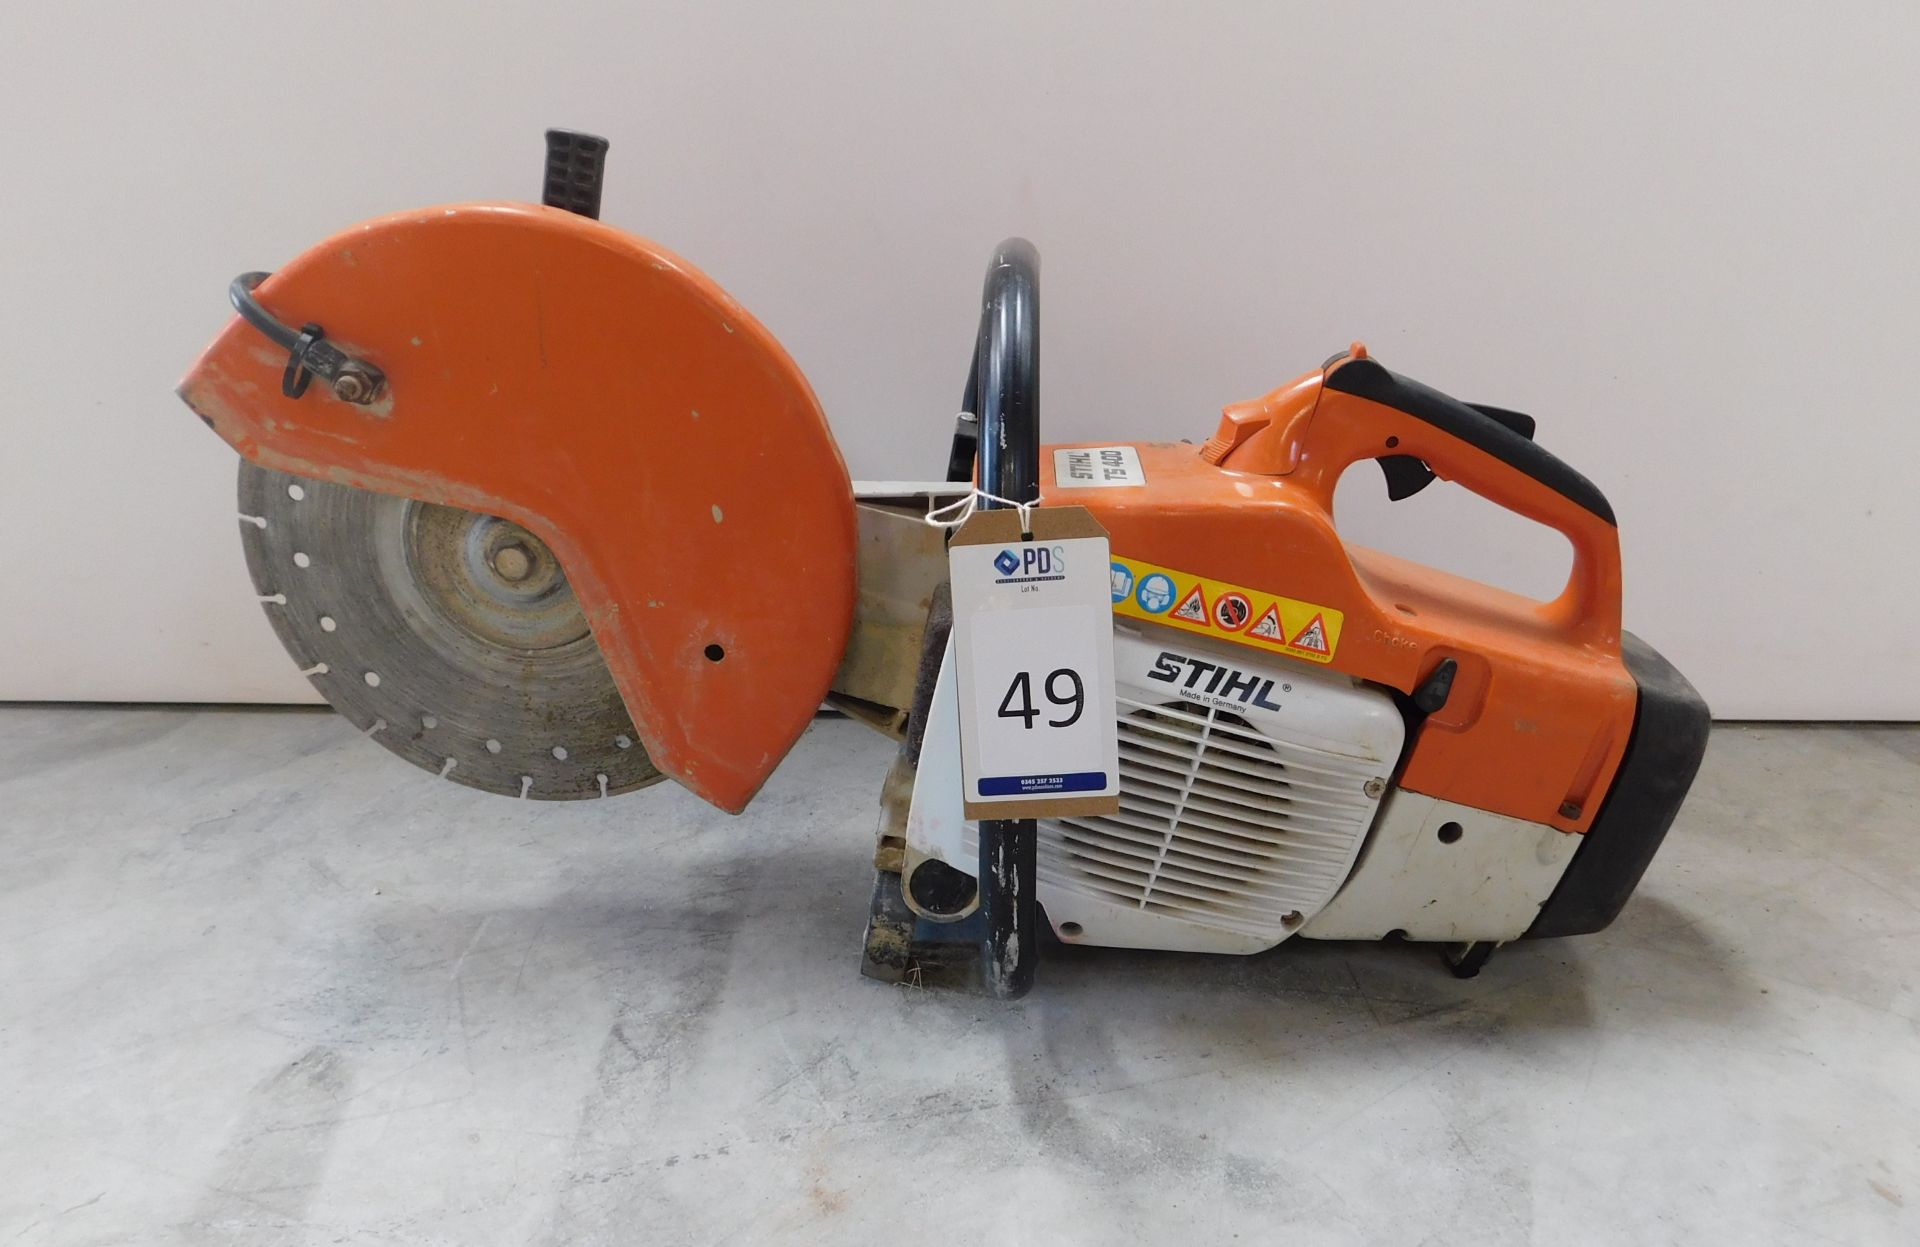 Stihl T5400 Petrol Cutter (Location: Brentwood. Please Refer to General Notes)